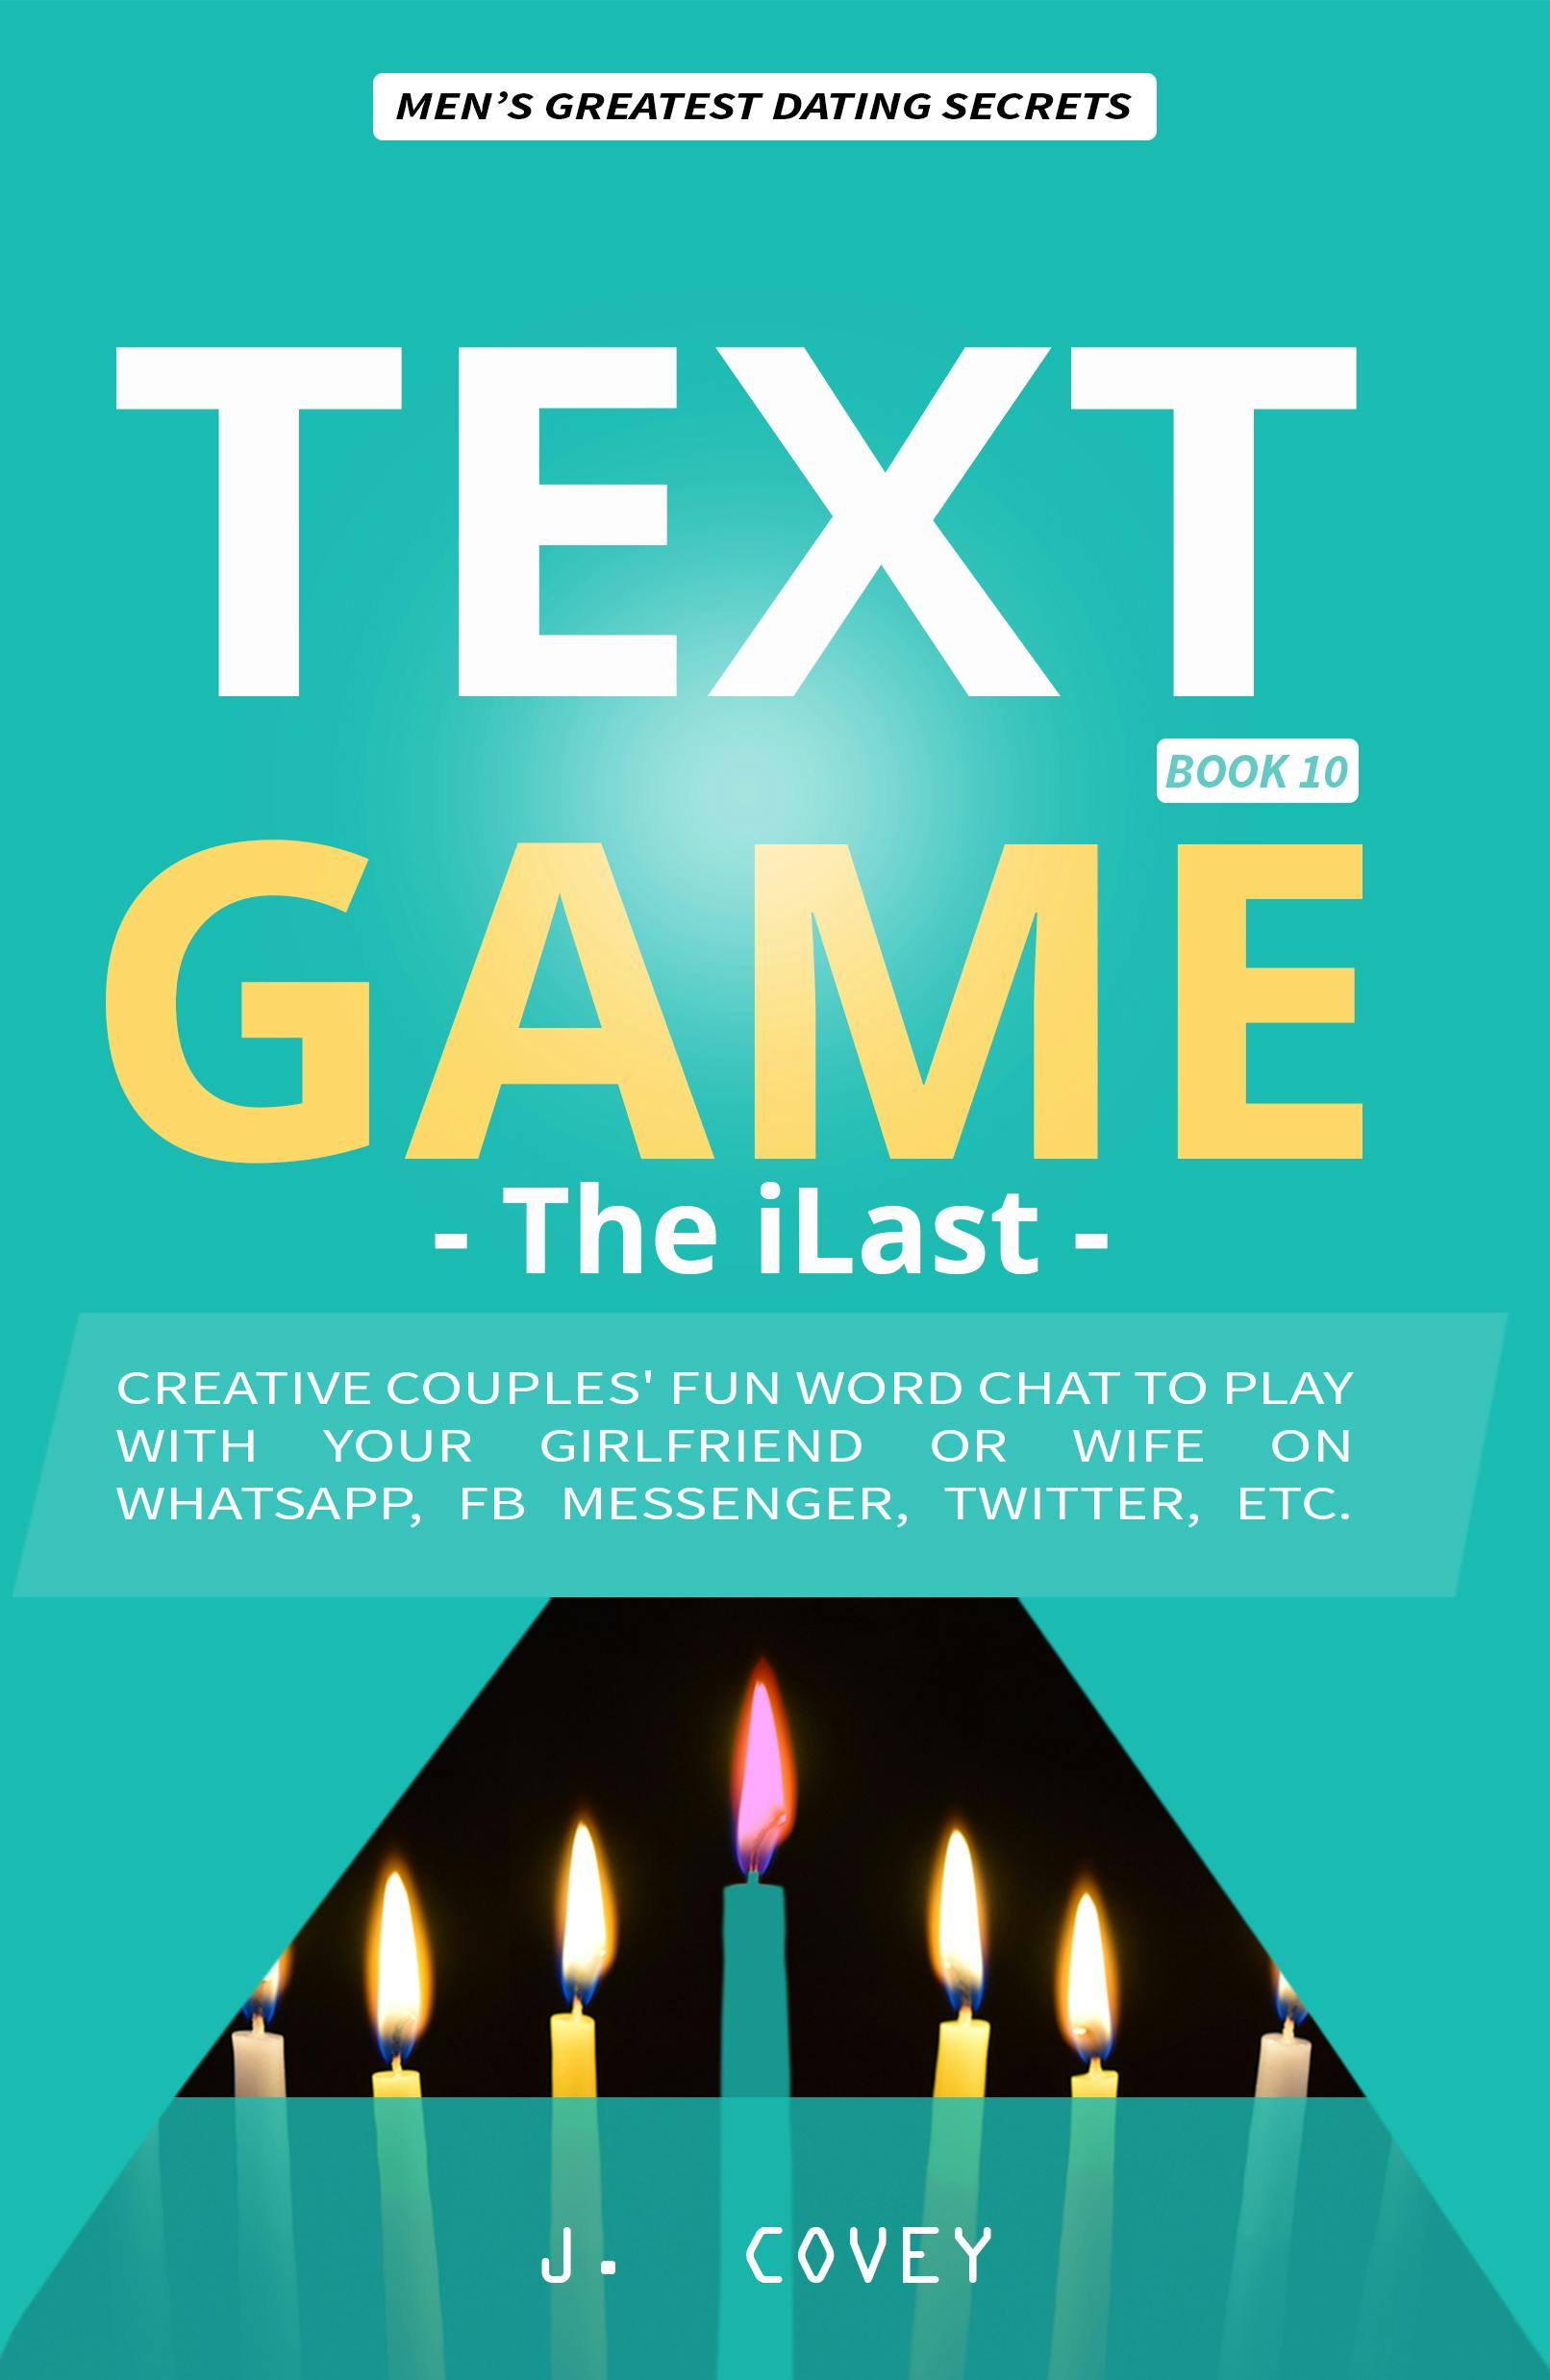 TEXT GAME - undefined